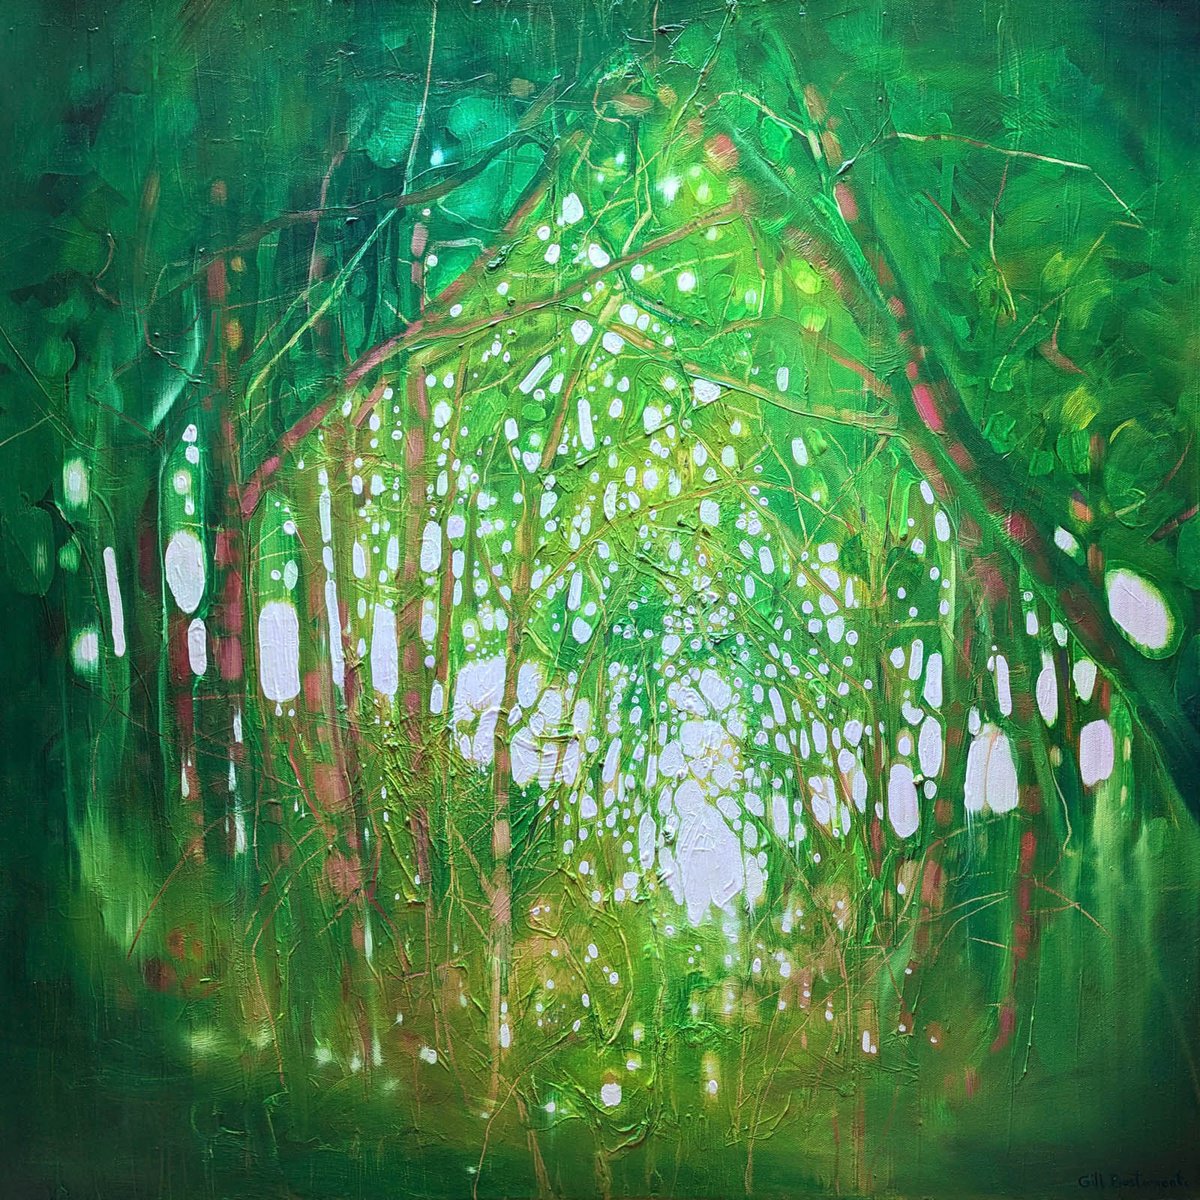 The Green Wood Beckons by Gill Bustamante